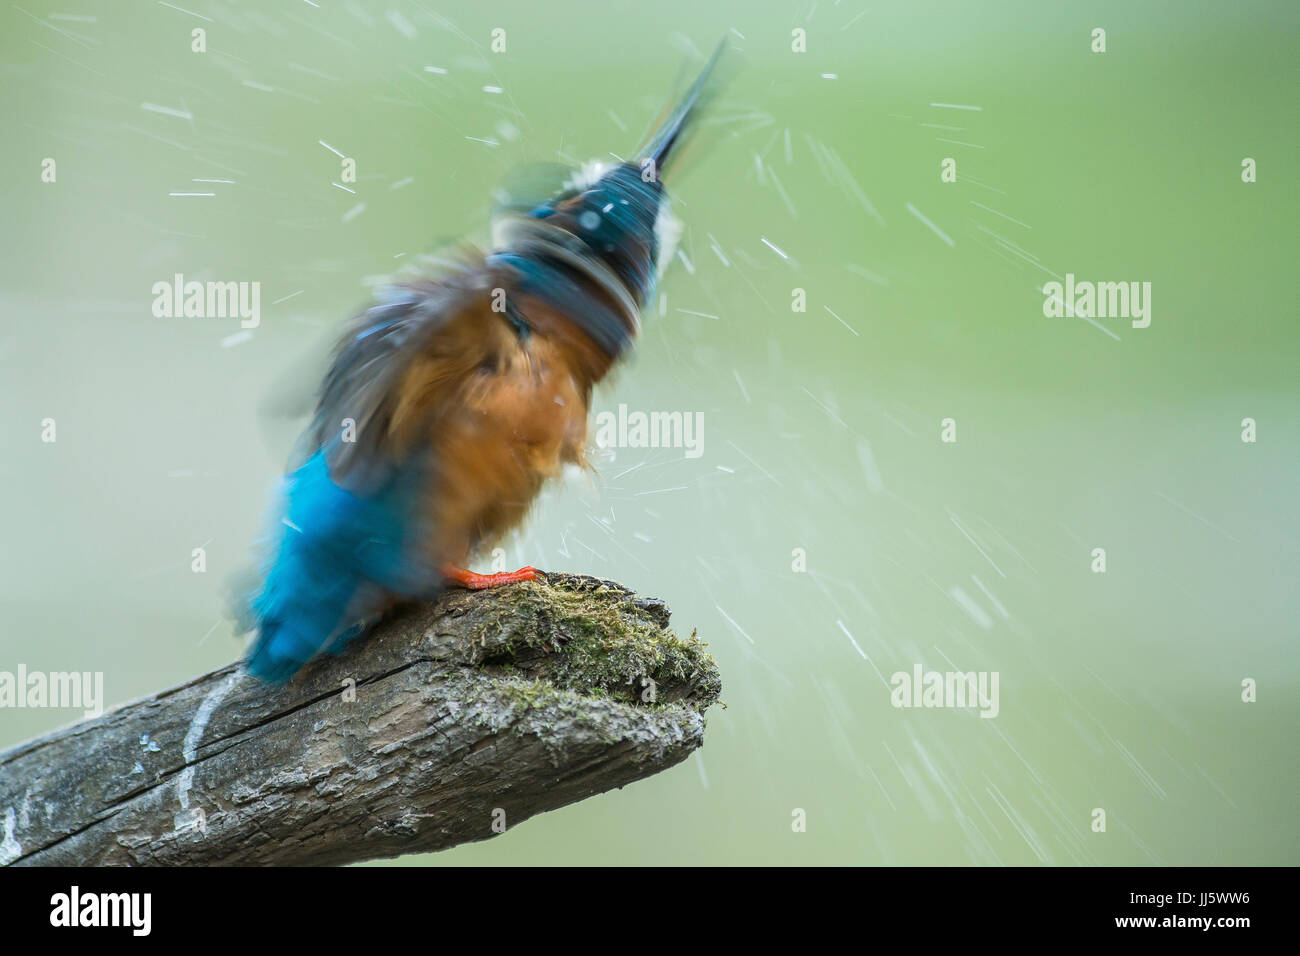 Kingfisher shaking the water off Stock Photo